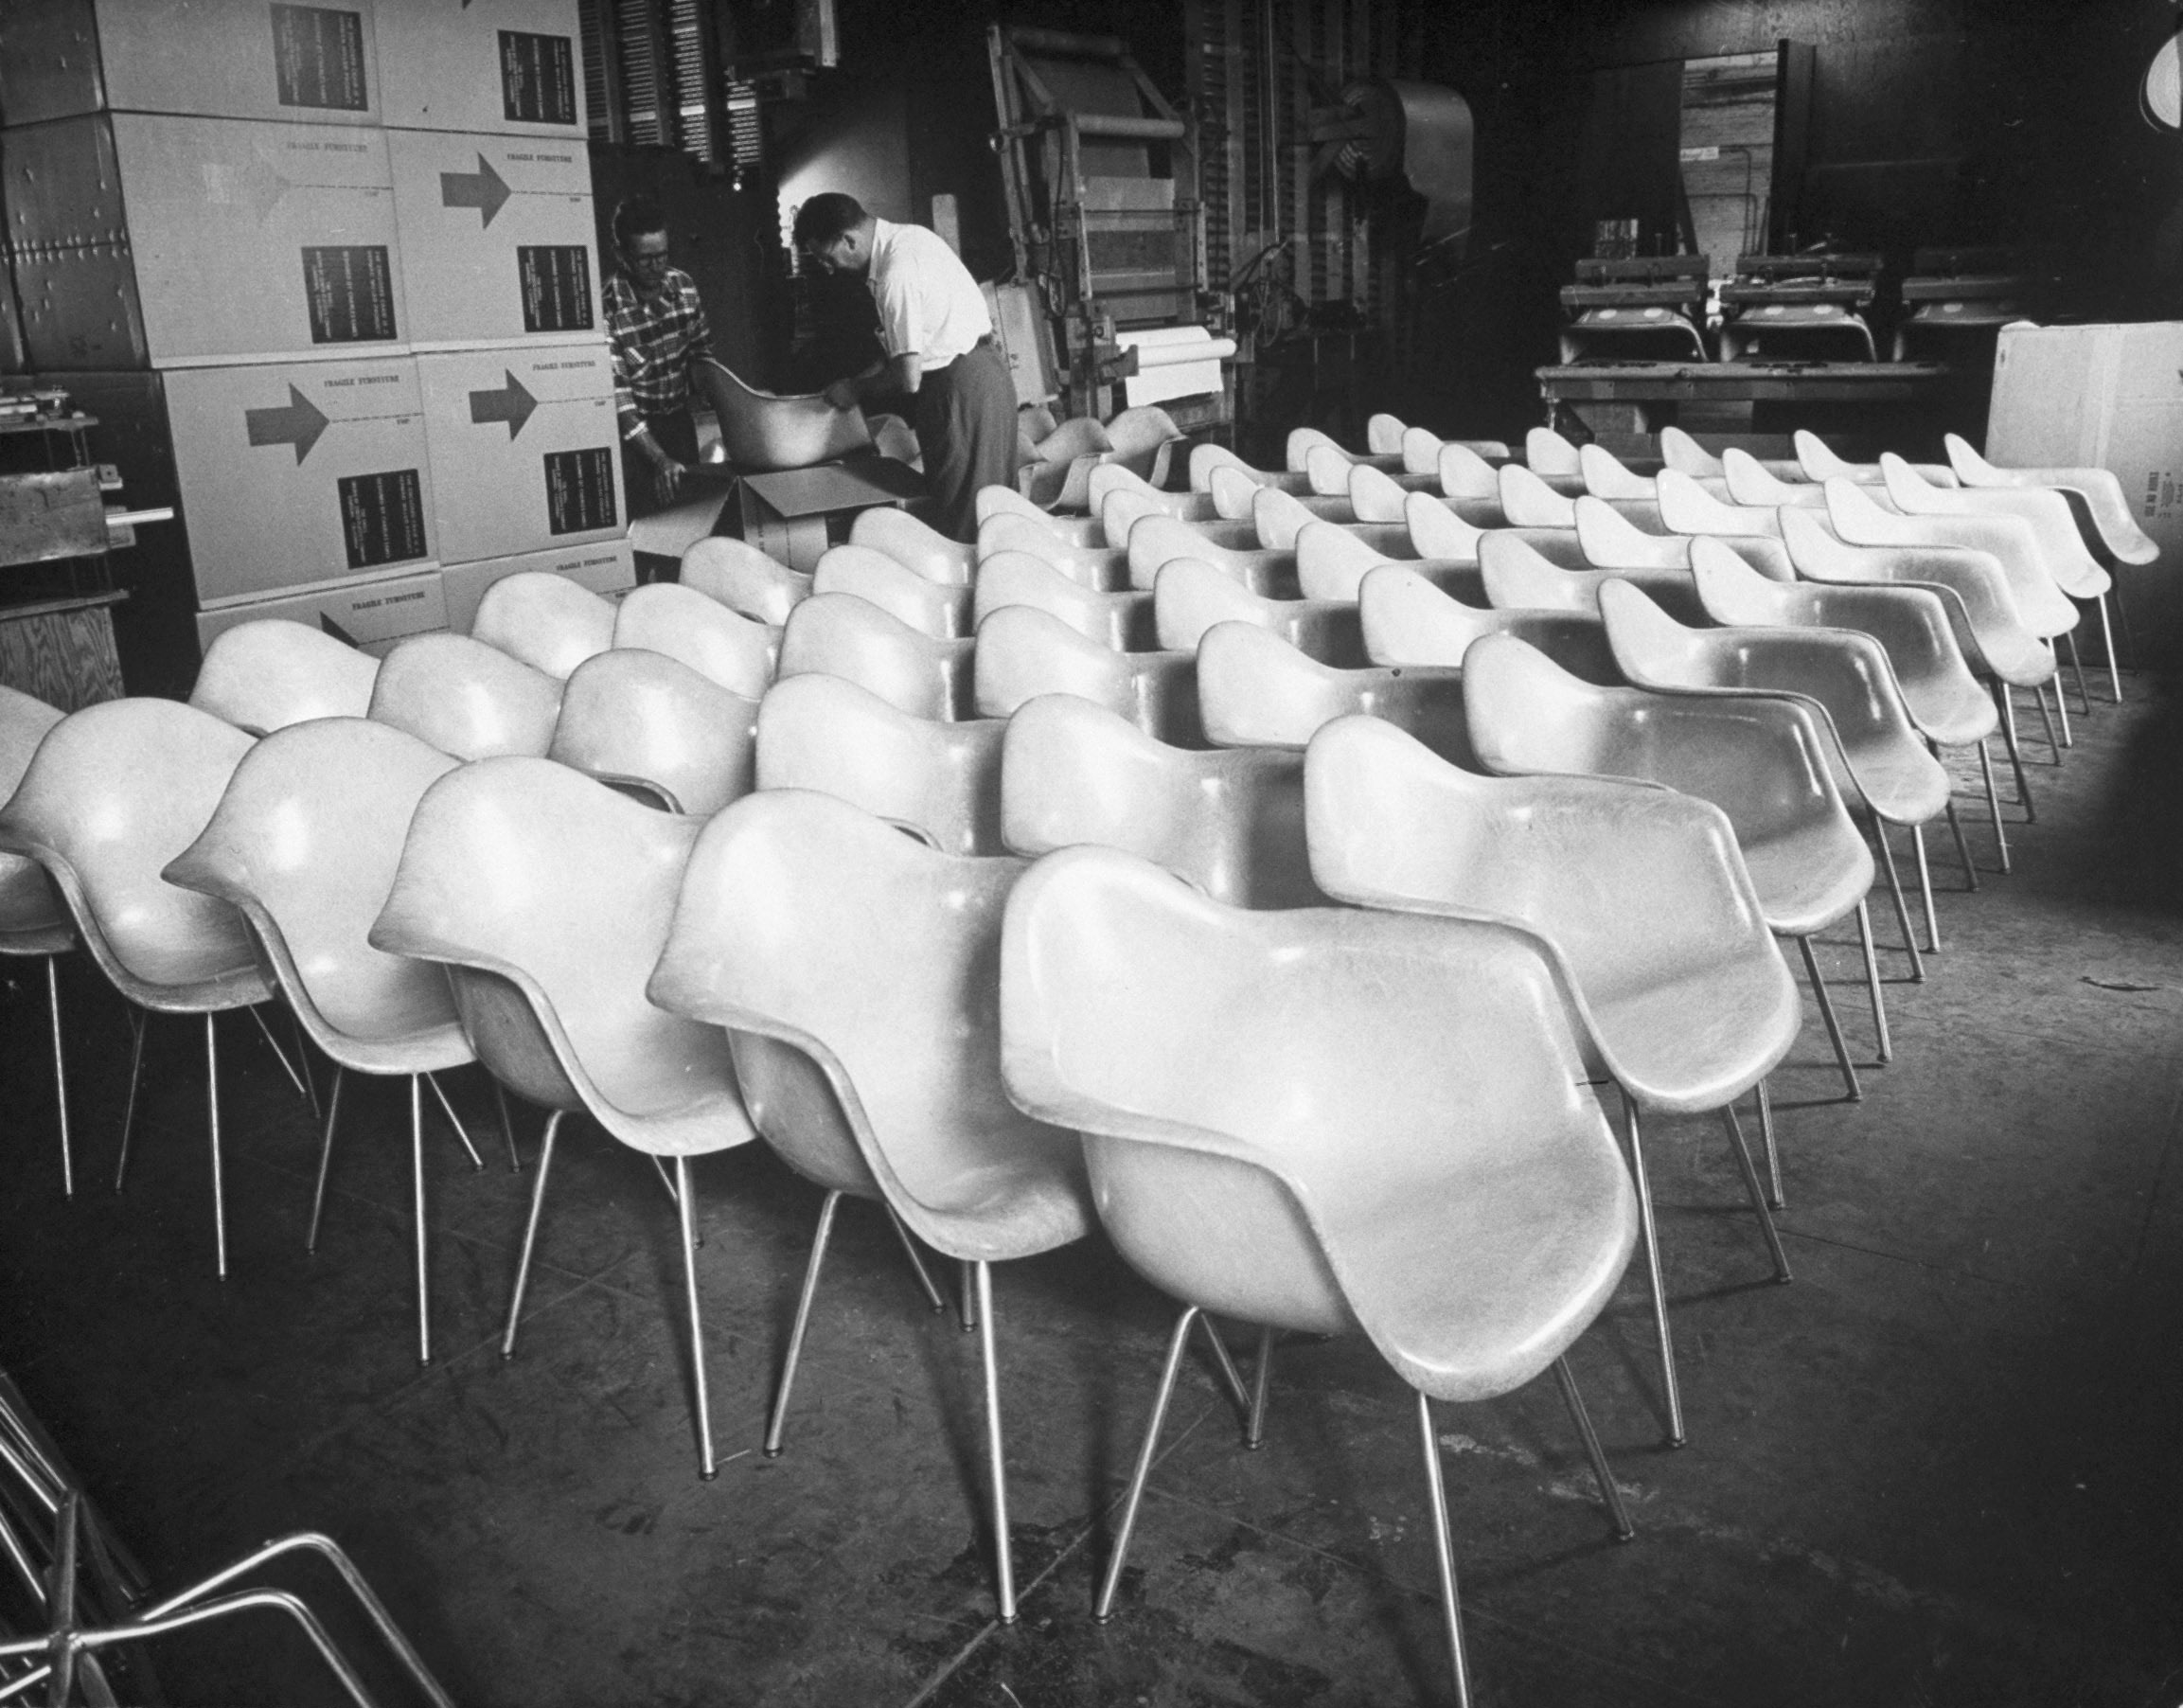 Eames-designed chairs, 1950.